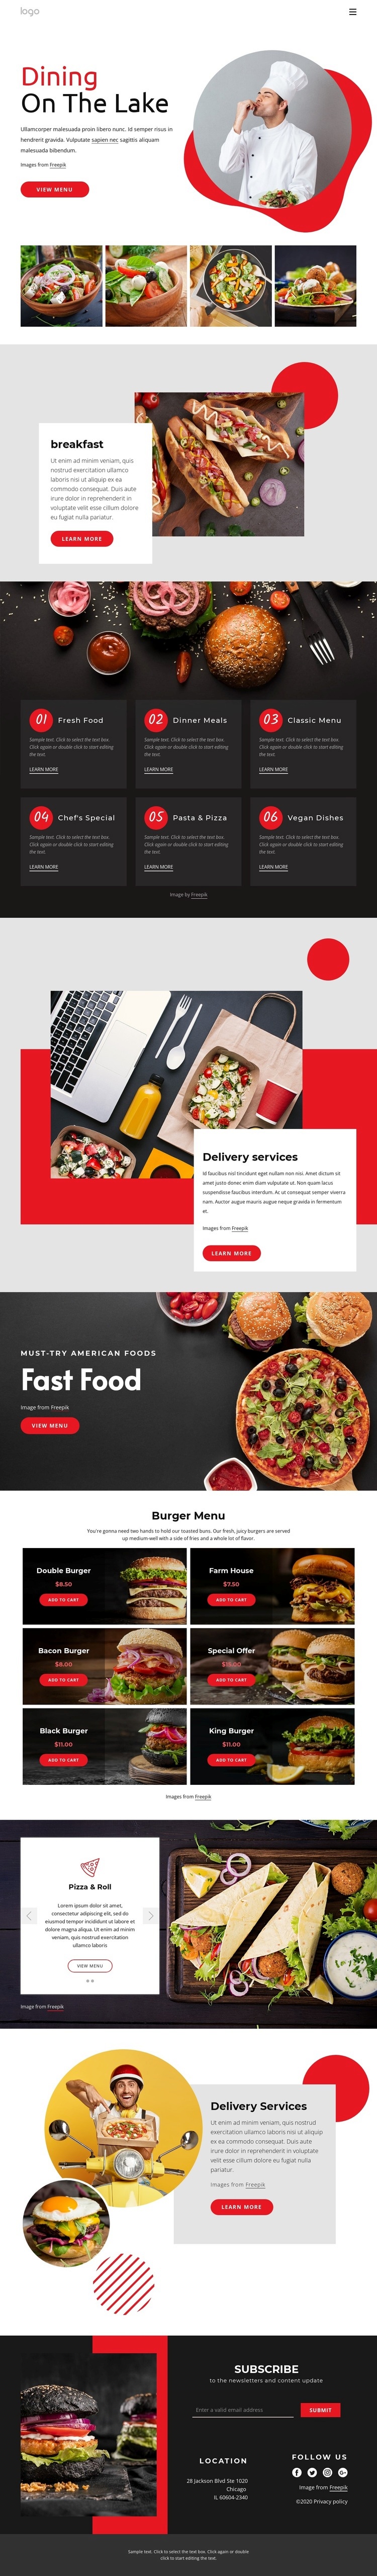 Dining on the lake Wix Template Alternative